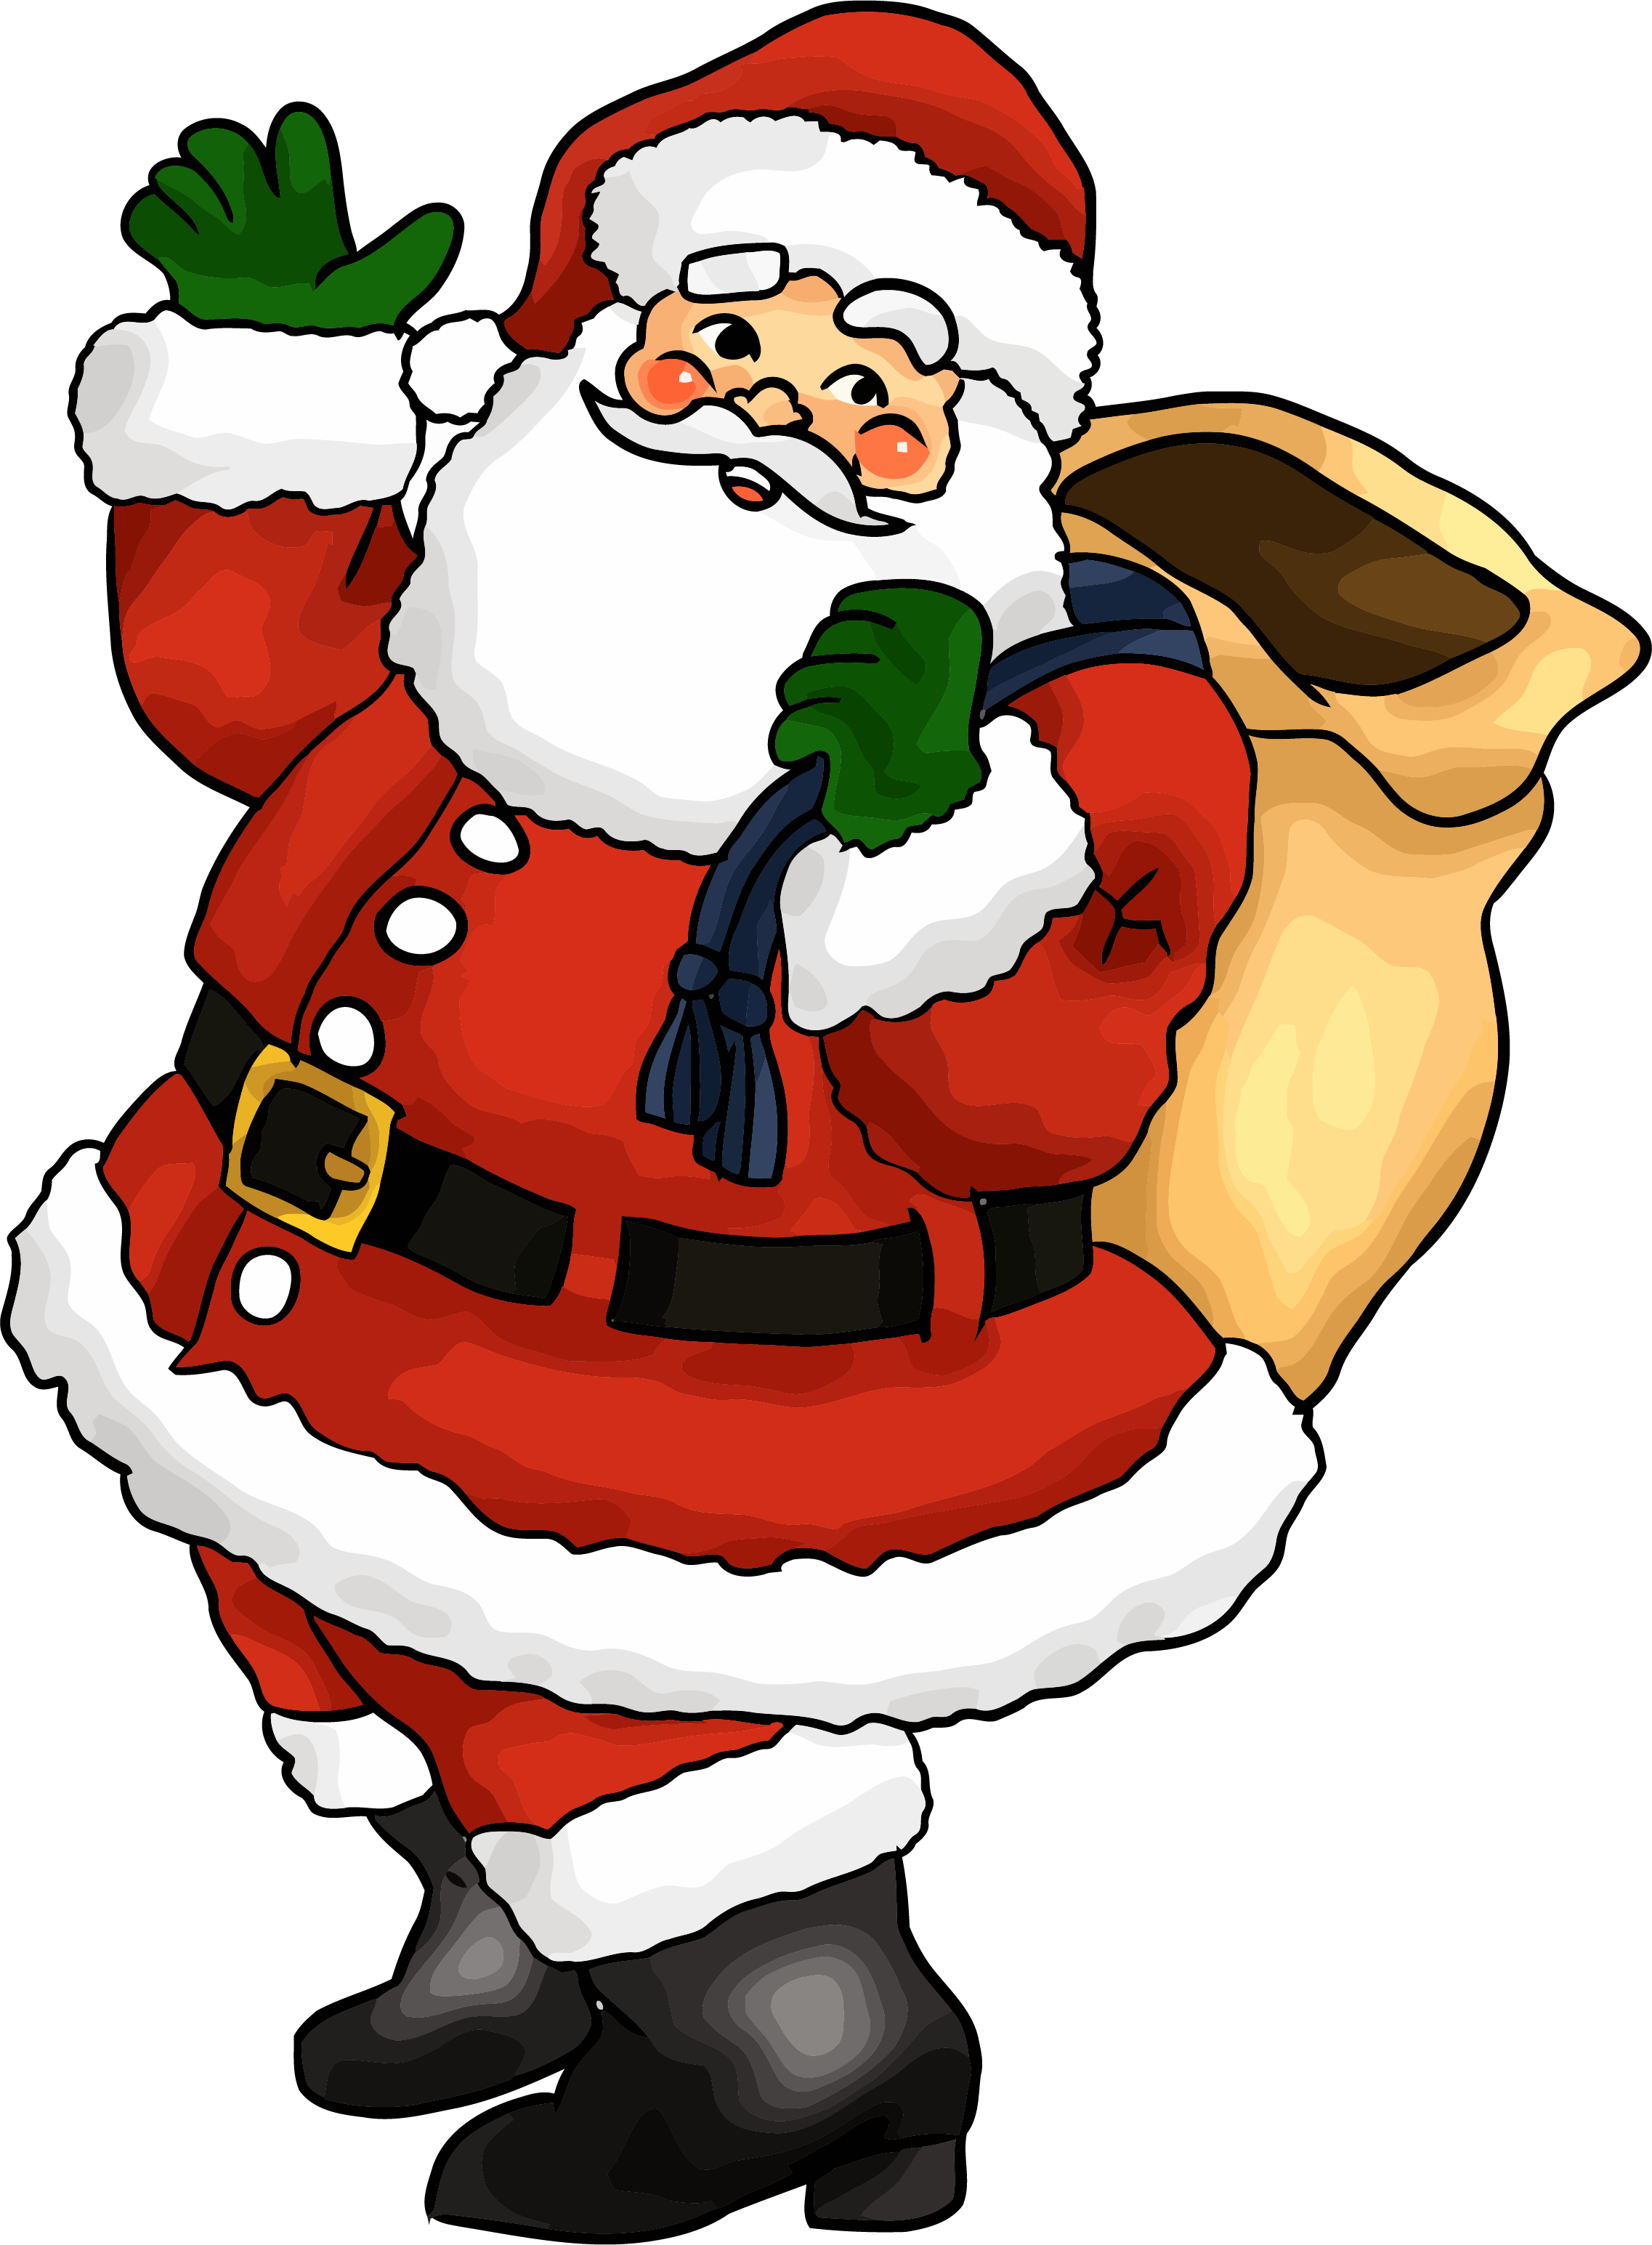 A Cartoon Of A Santa Claus Carrying A Sack Of Presents